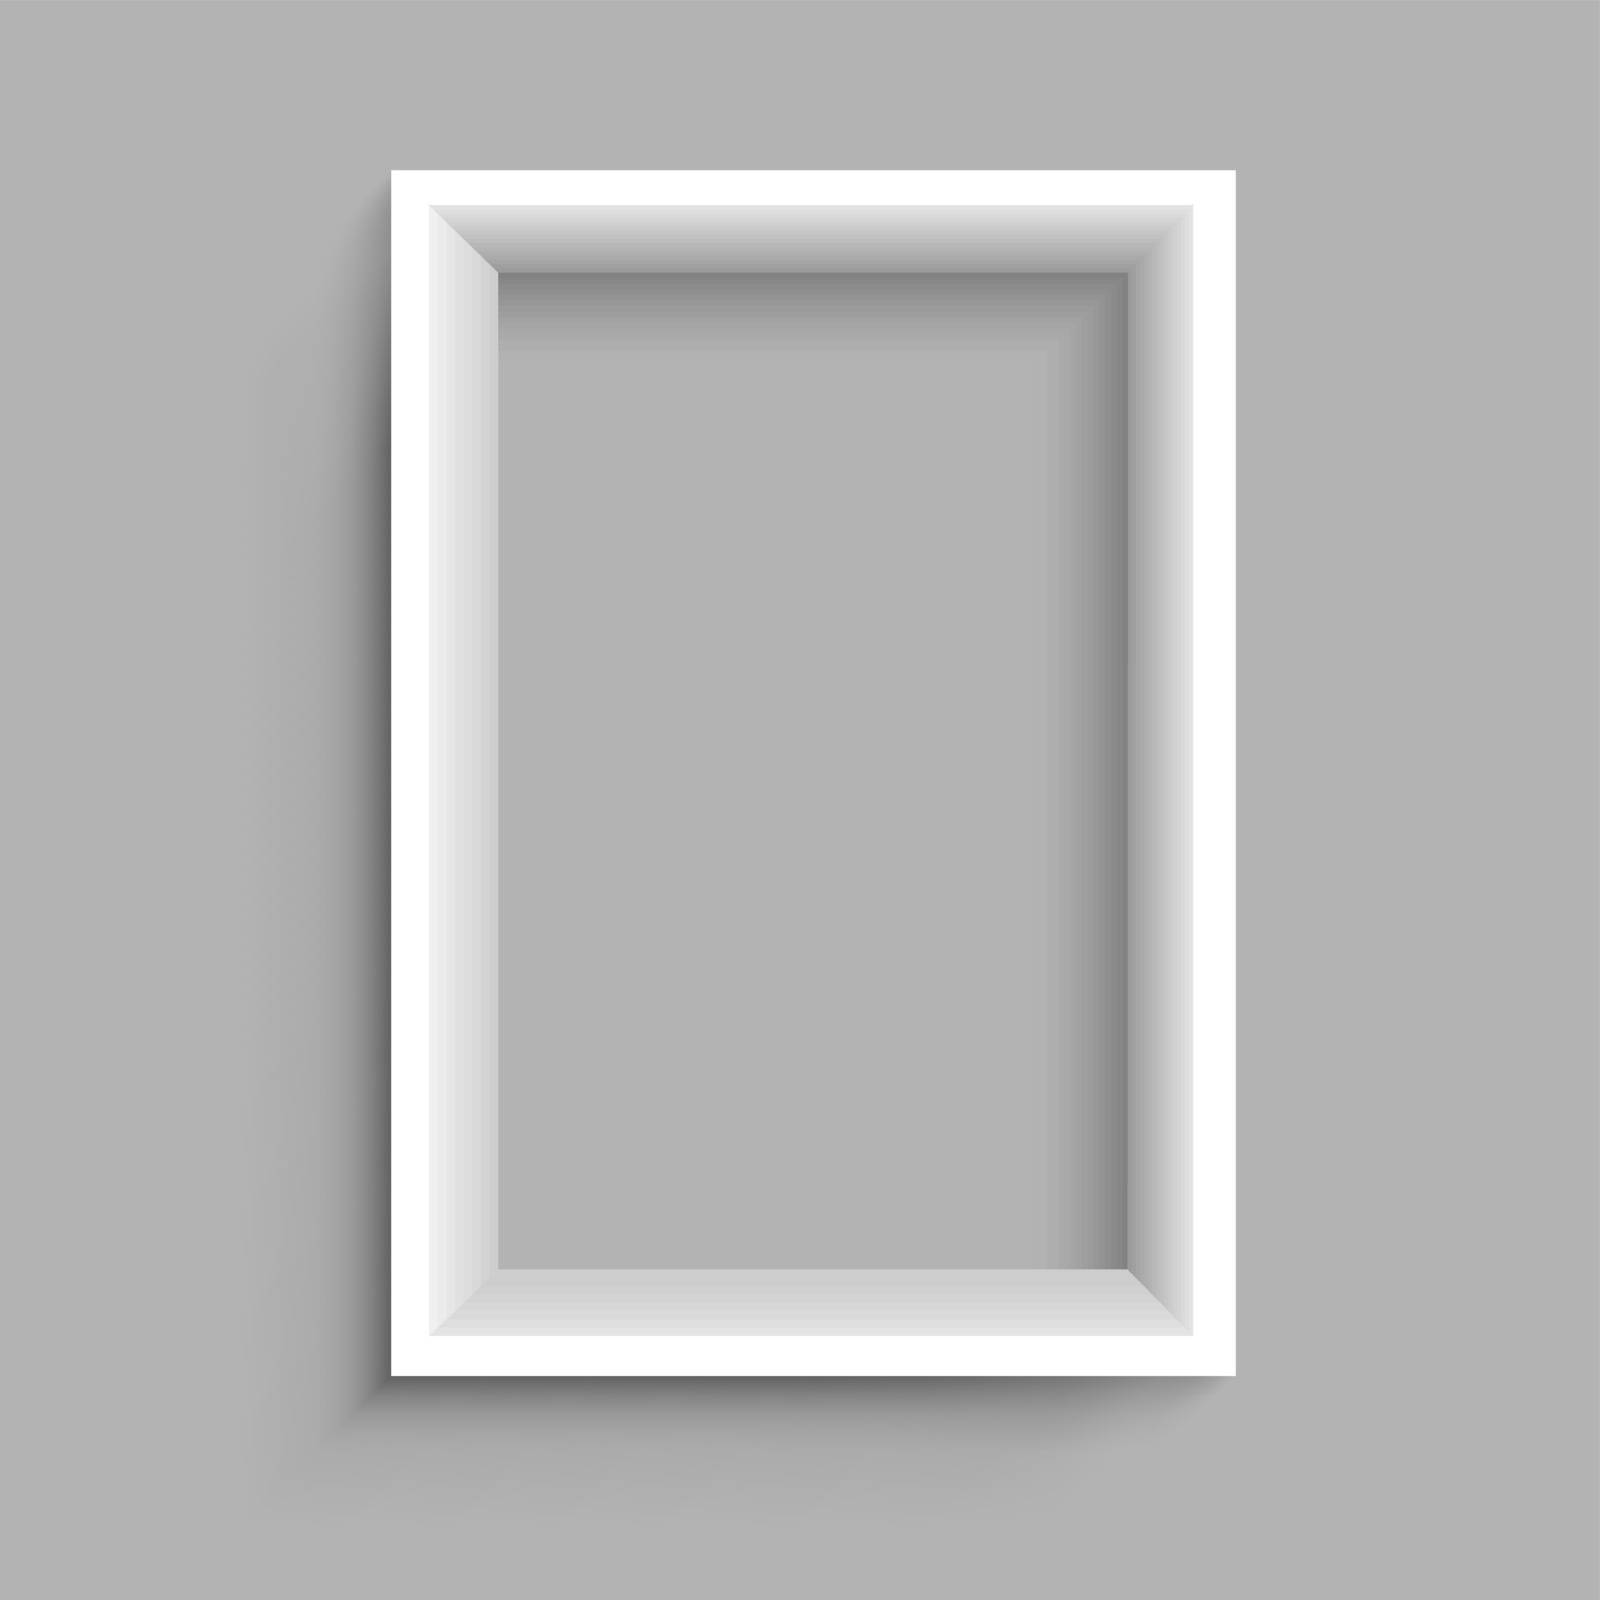 Modern rectangular vertical plastic wooden or paper white shelf with shadow on gray background. Frame furniture design